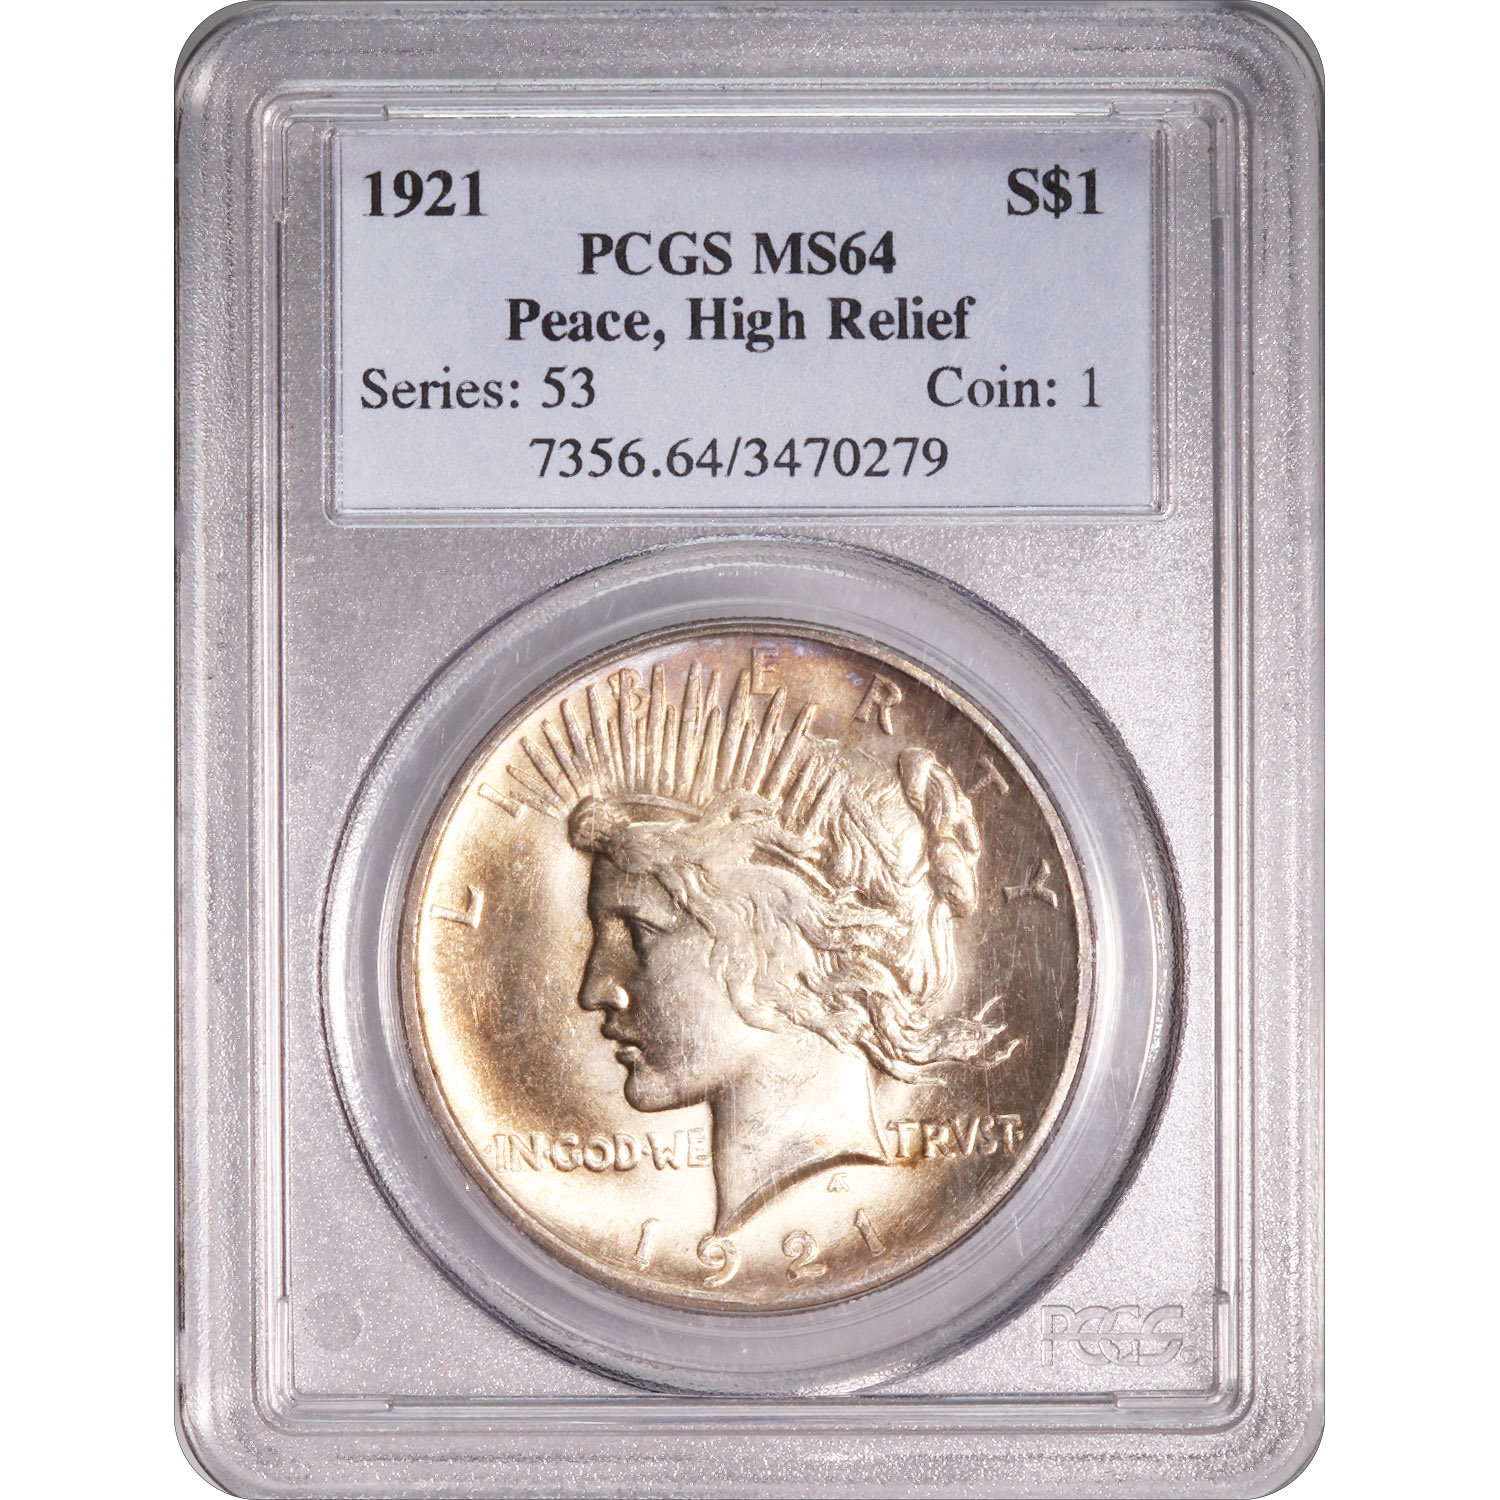 Certified Peace Silver Dollar 1921 MS64 PCGS